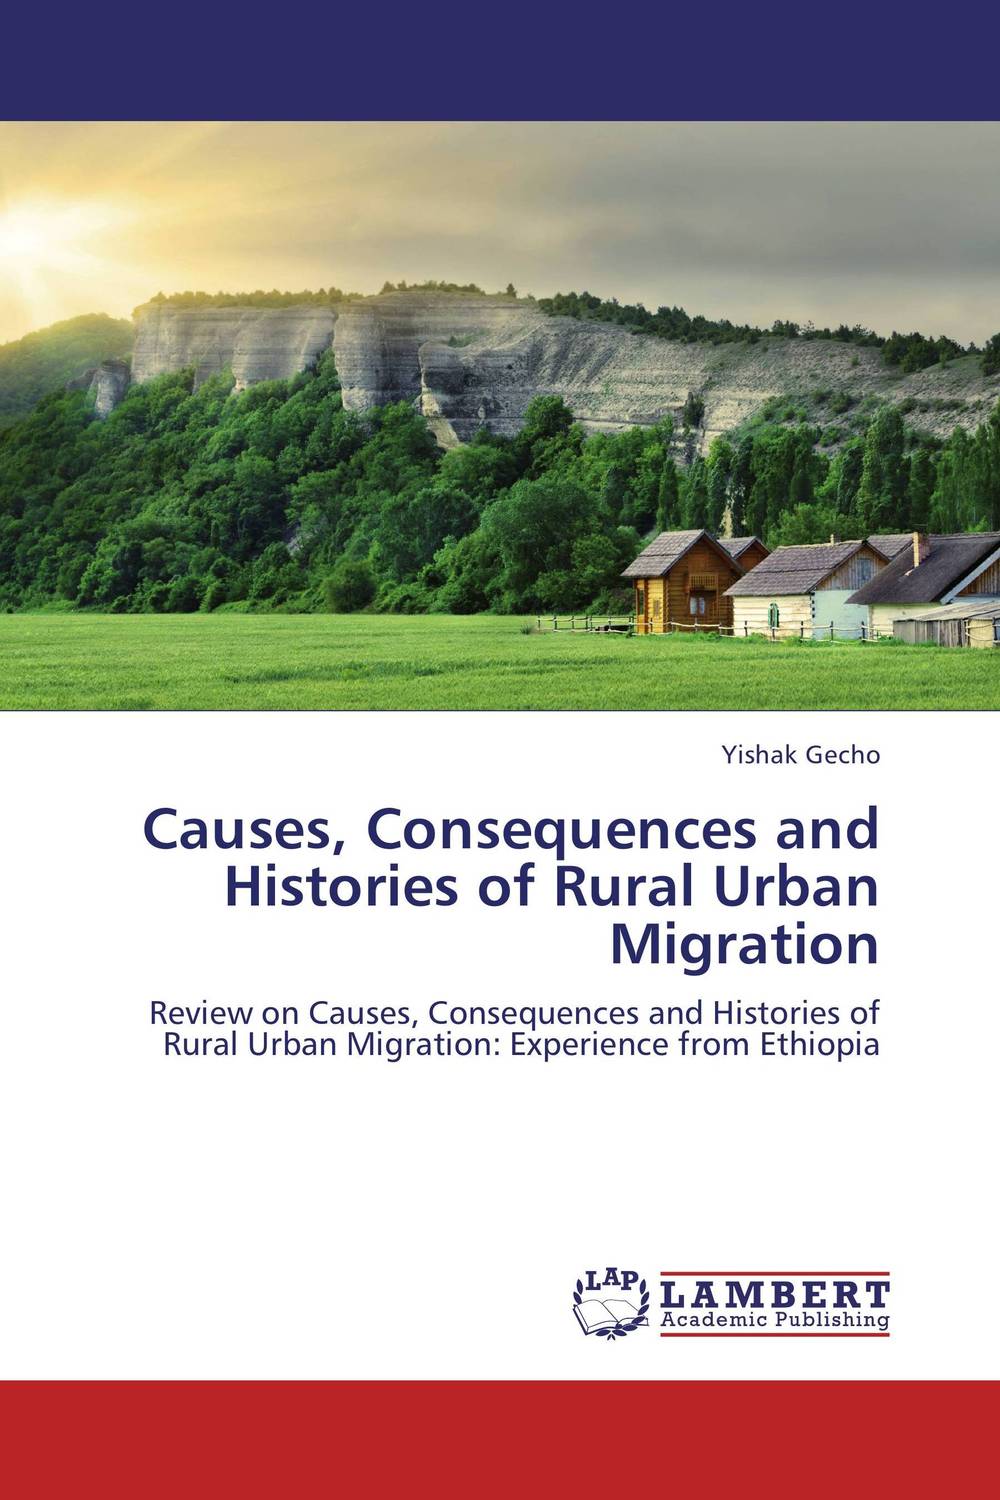 Causes, Consequences and Histories of Rural Urban Migration